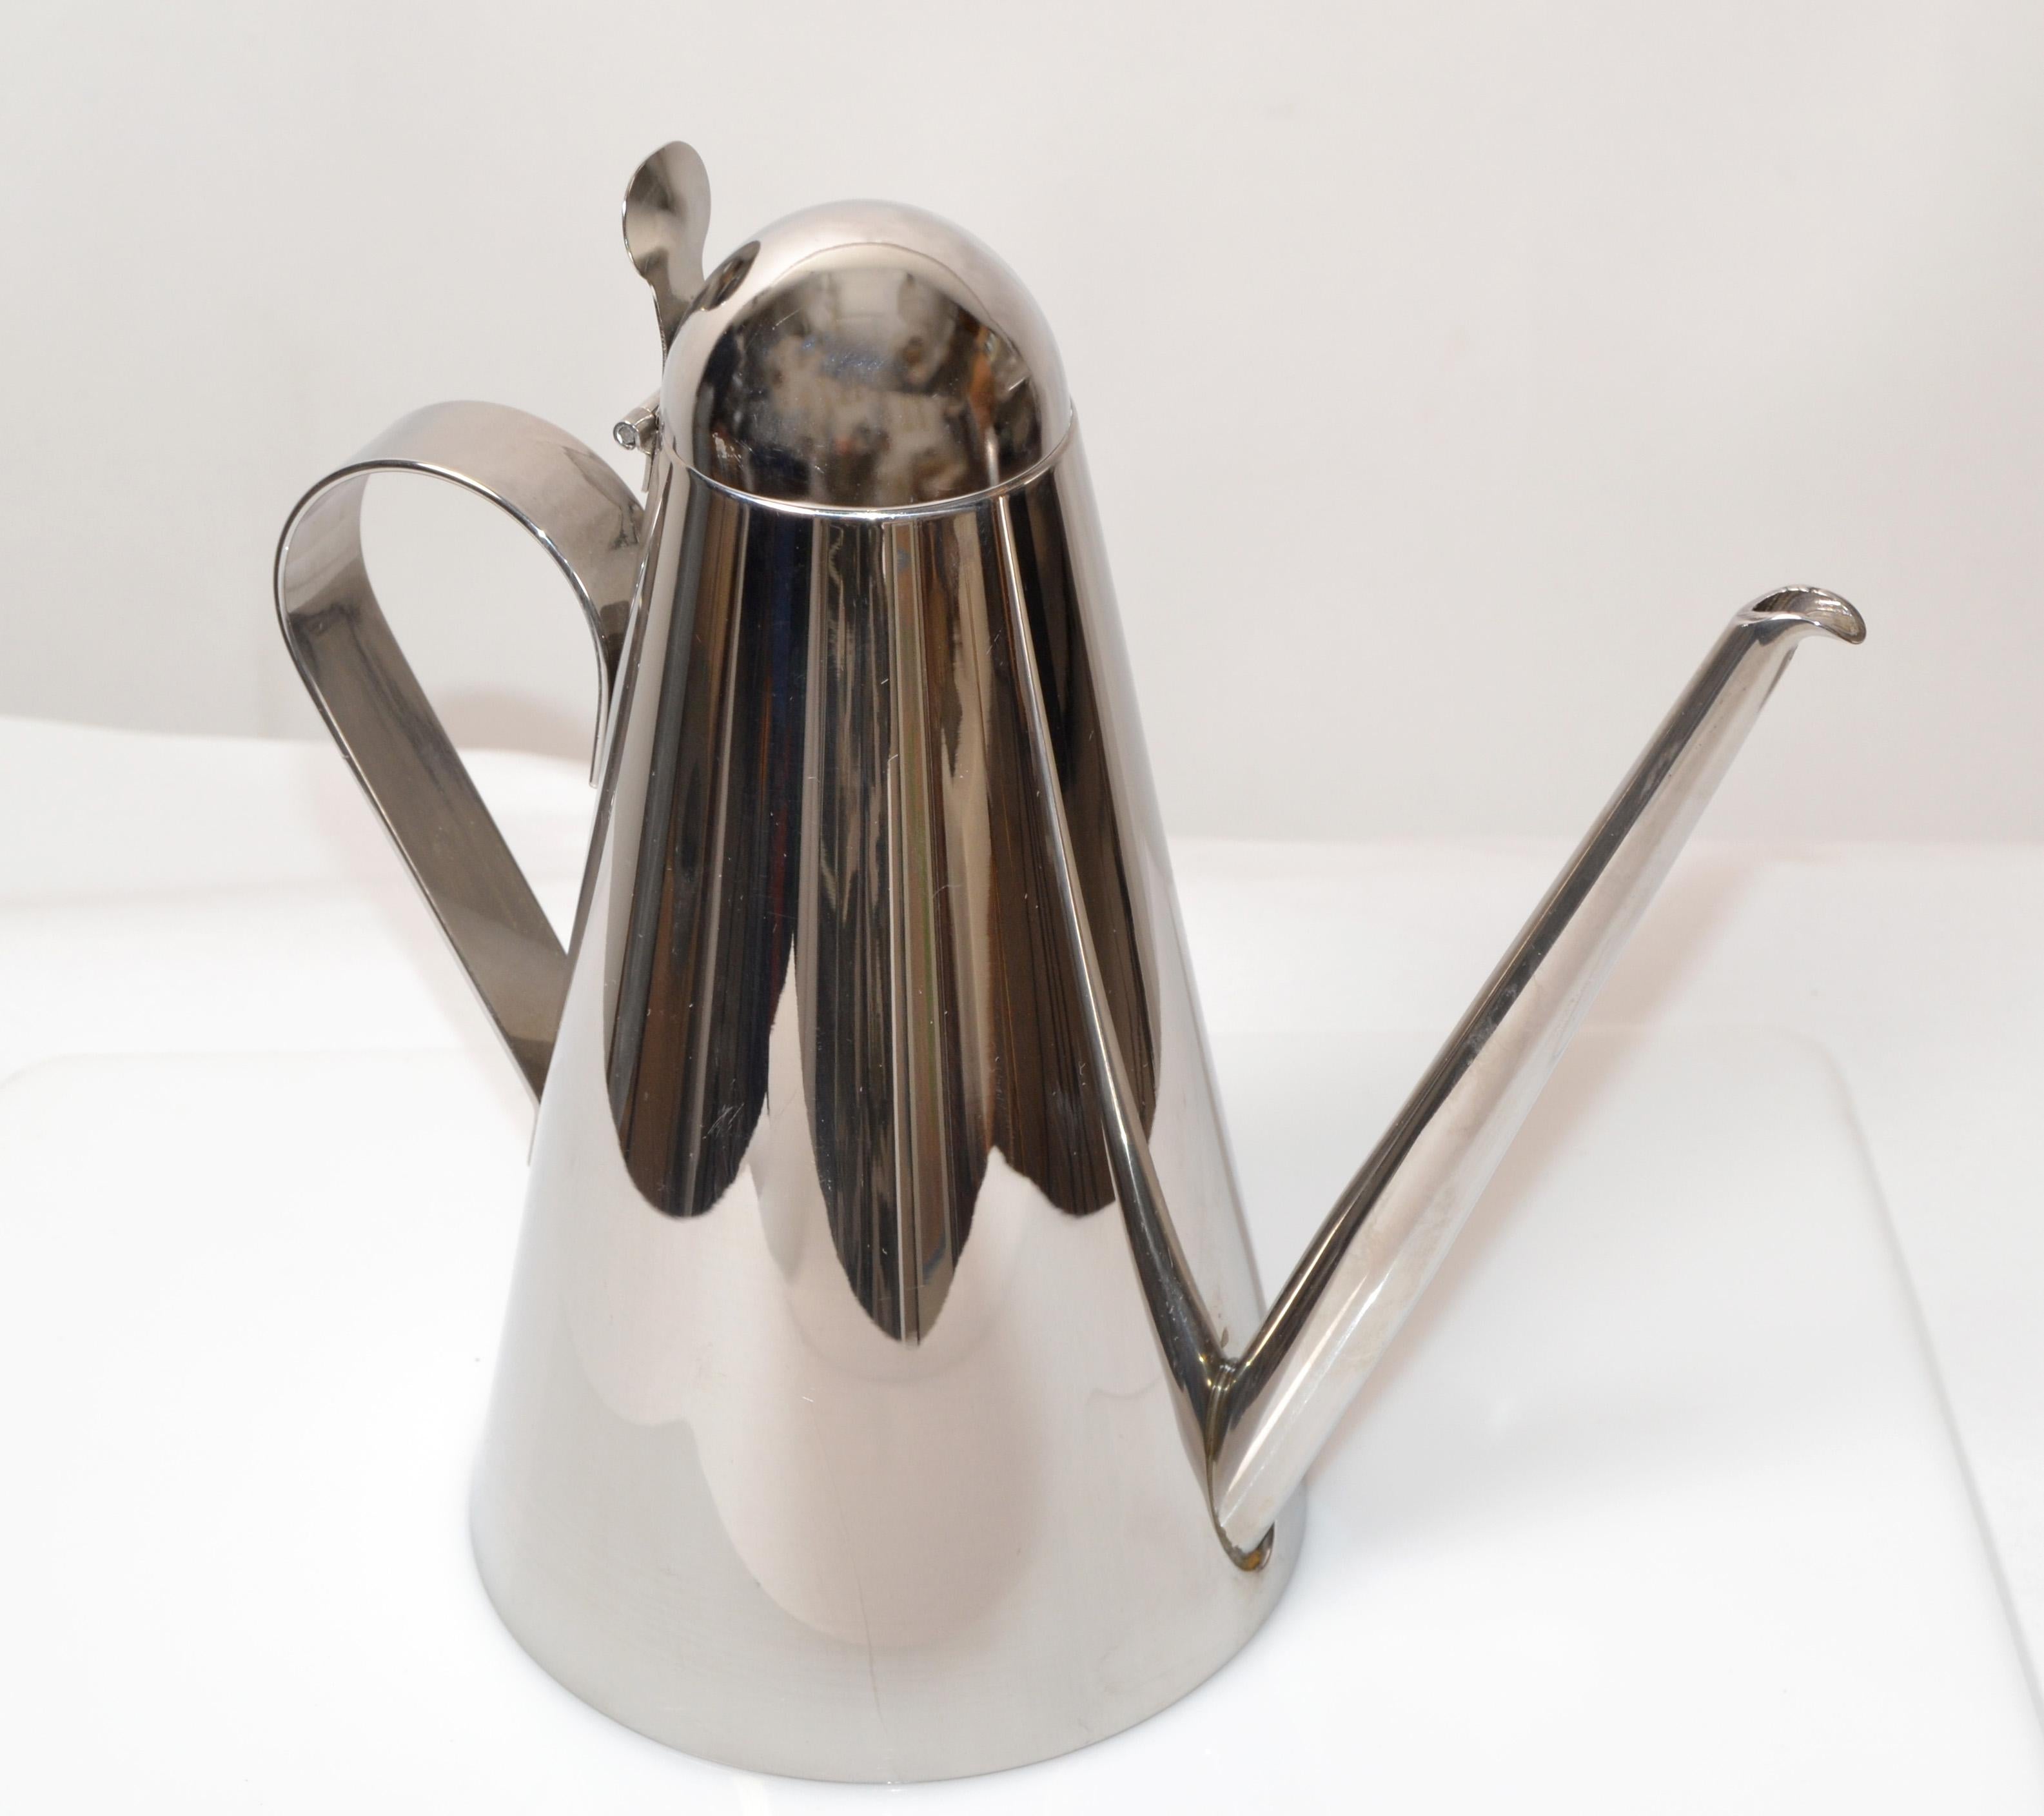 Cerutti Italy Tea, Coffee Pot, Carafe, Vessel INOX 18/10 Stainless Steel For Sale 1